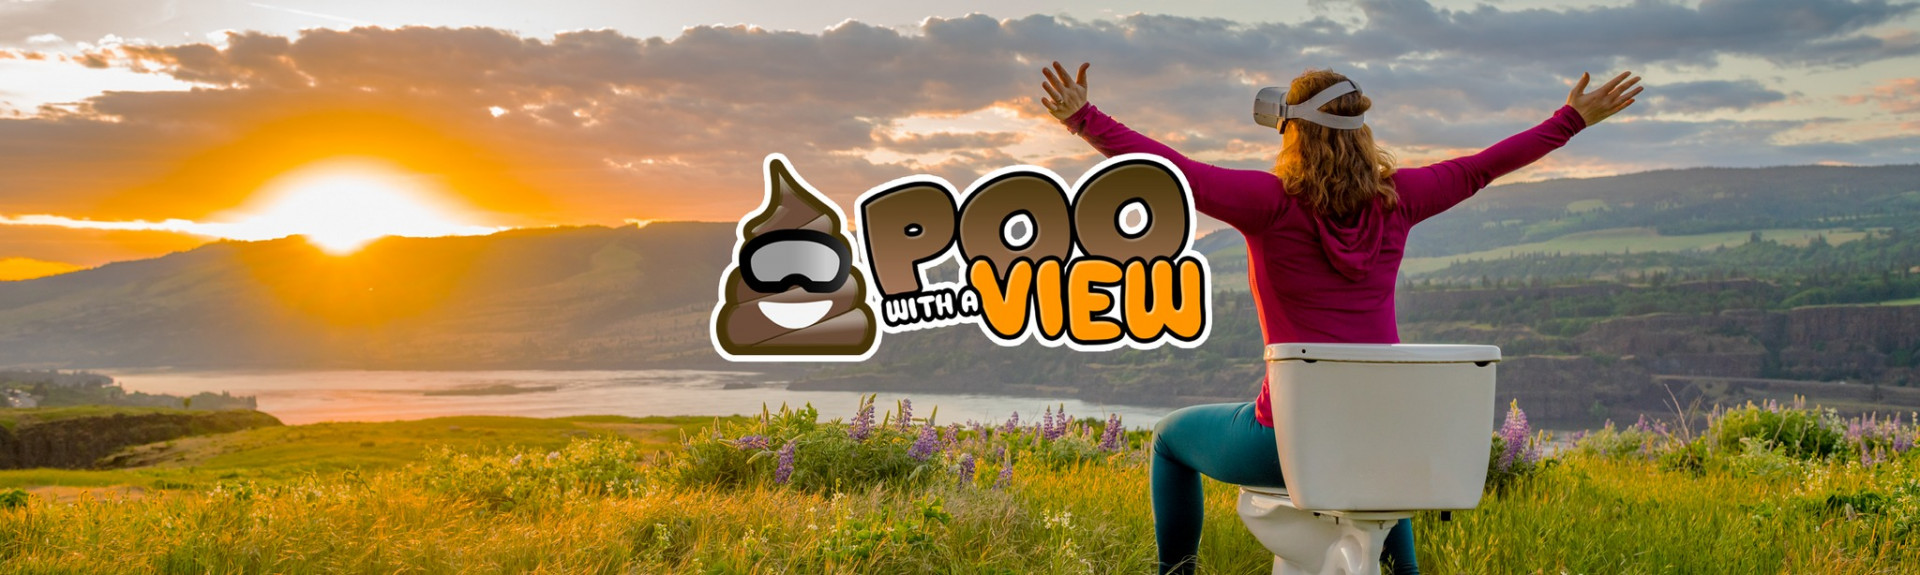 Poo With a View